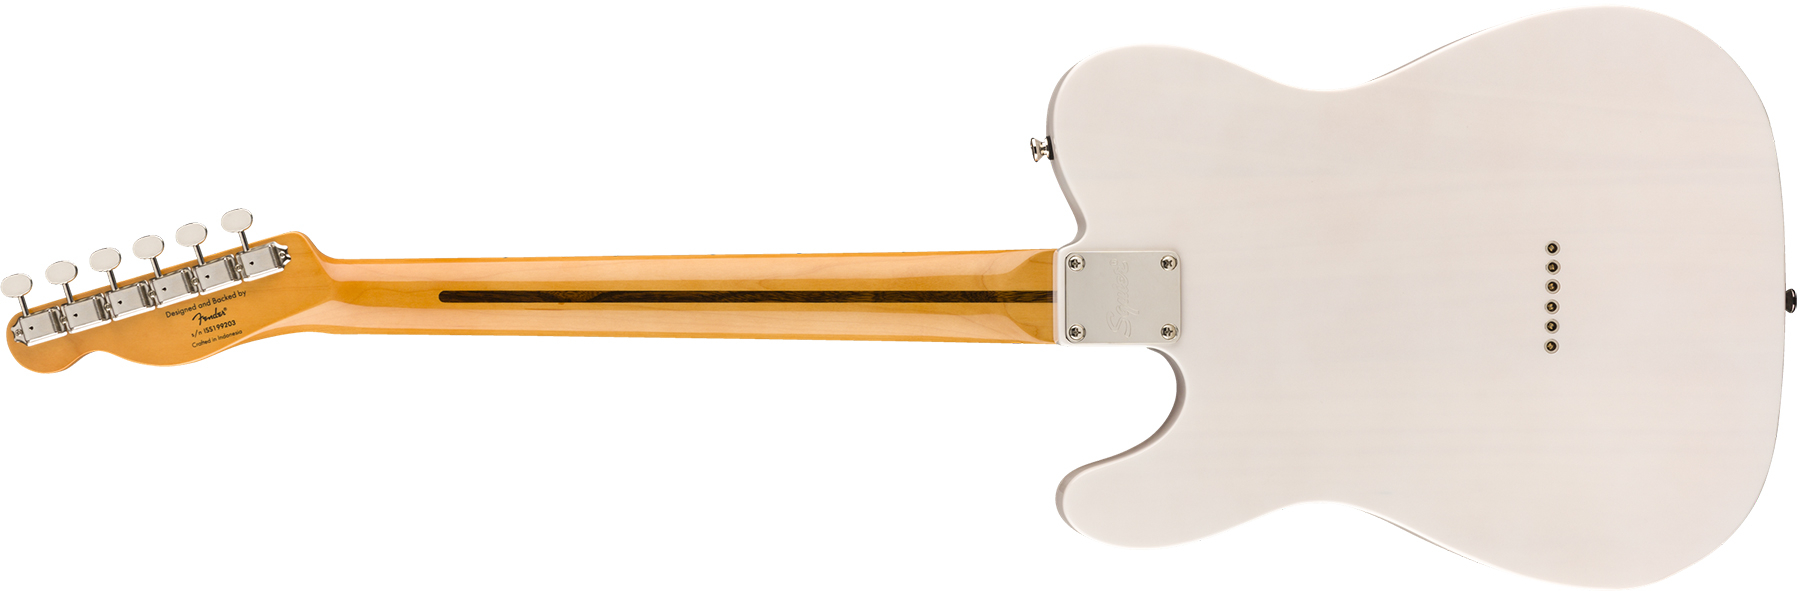 Squier Tele '50s Classic Vibe 2019 Mn 2019 - White Blonde - Tel shape electric guitar - Variation 1